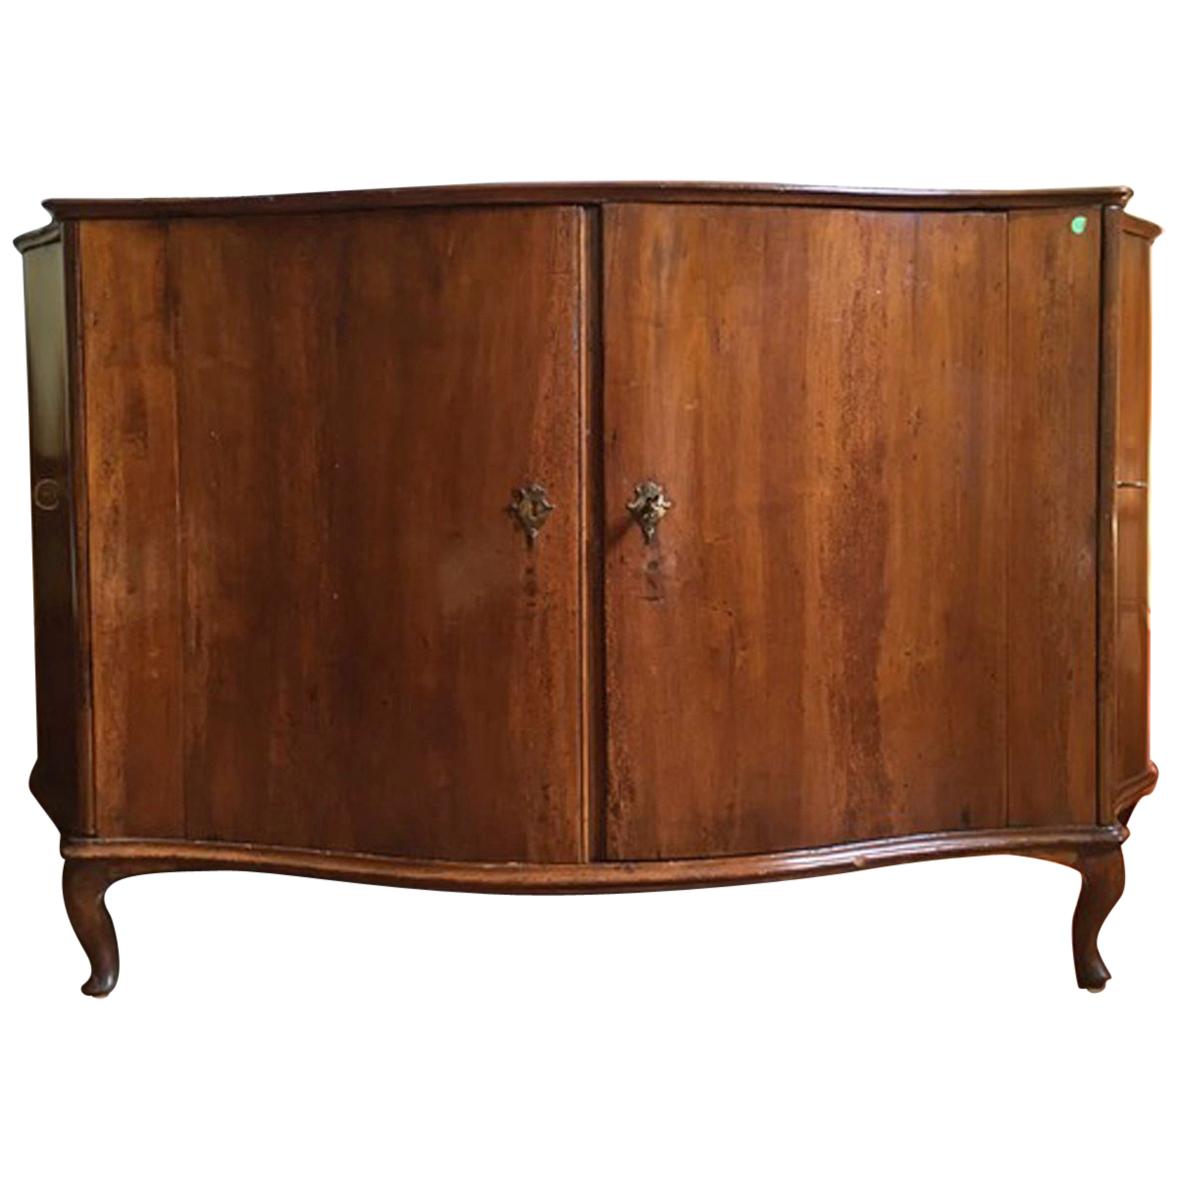 Italy Venezia Mid- 18th Century Baroque Hand Carved Walnut Sideboard For Sale